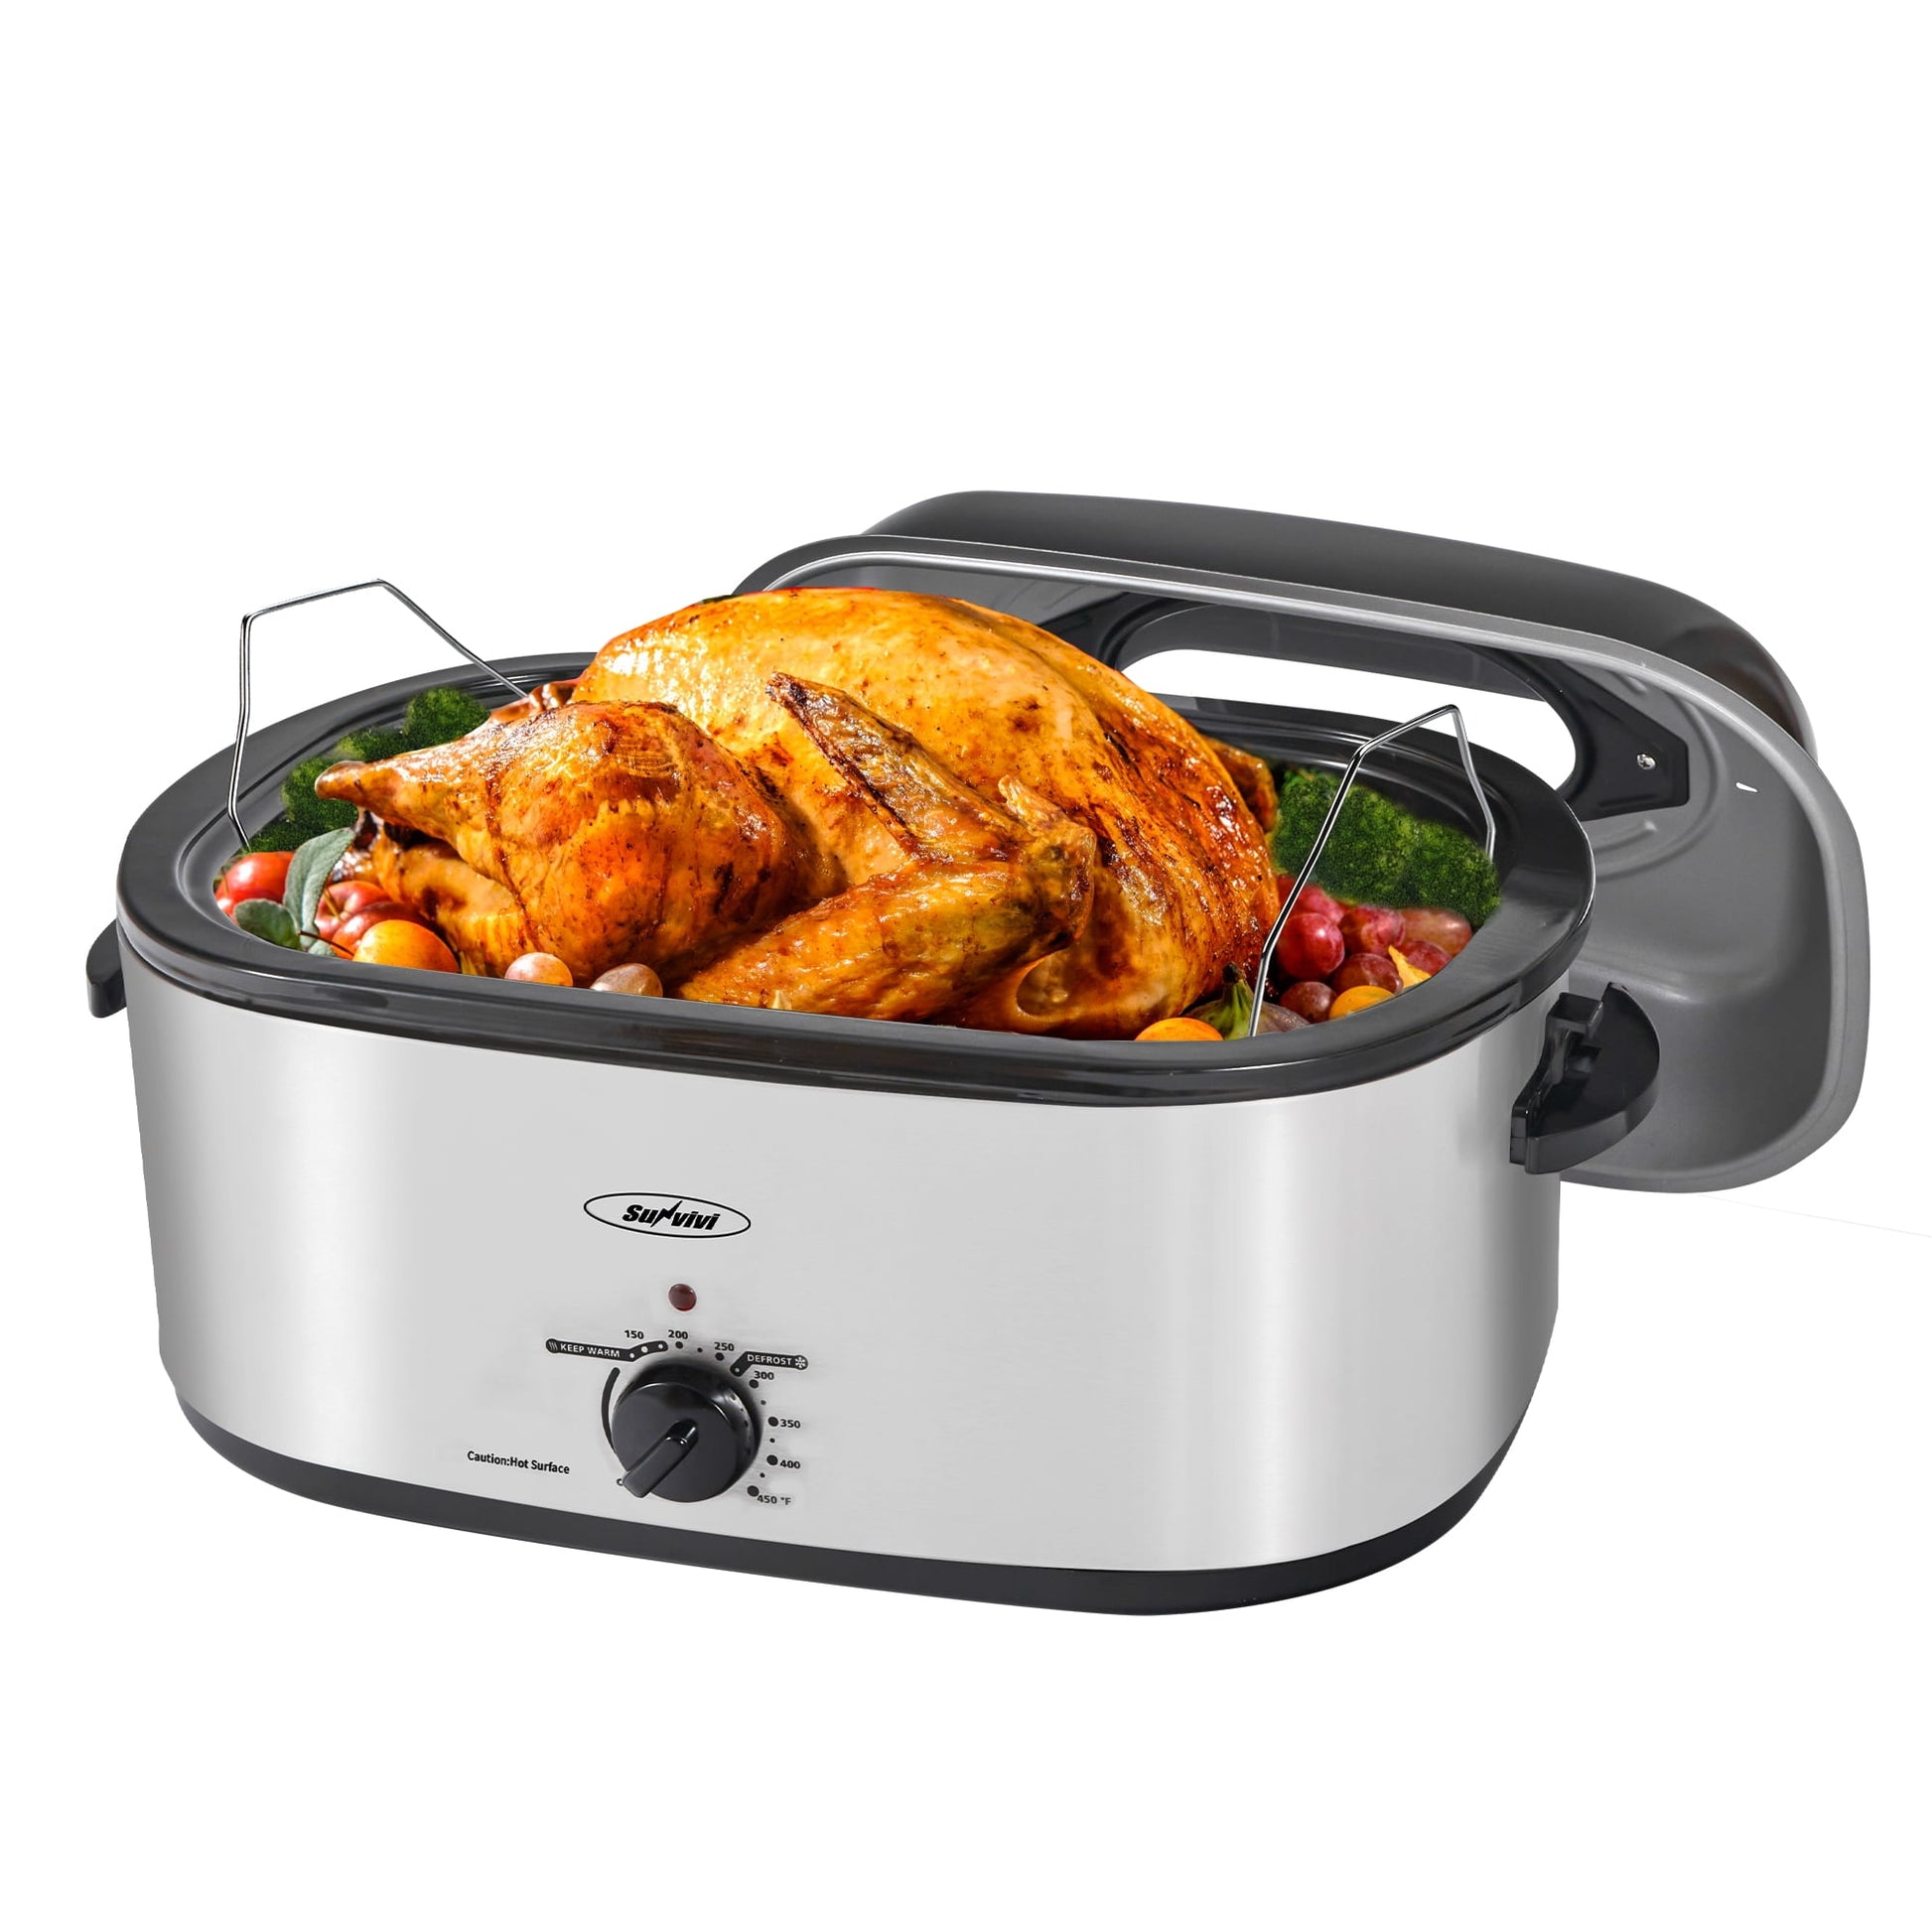 Oster 22-qt. Electric Roaster Oven